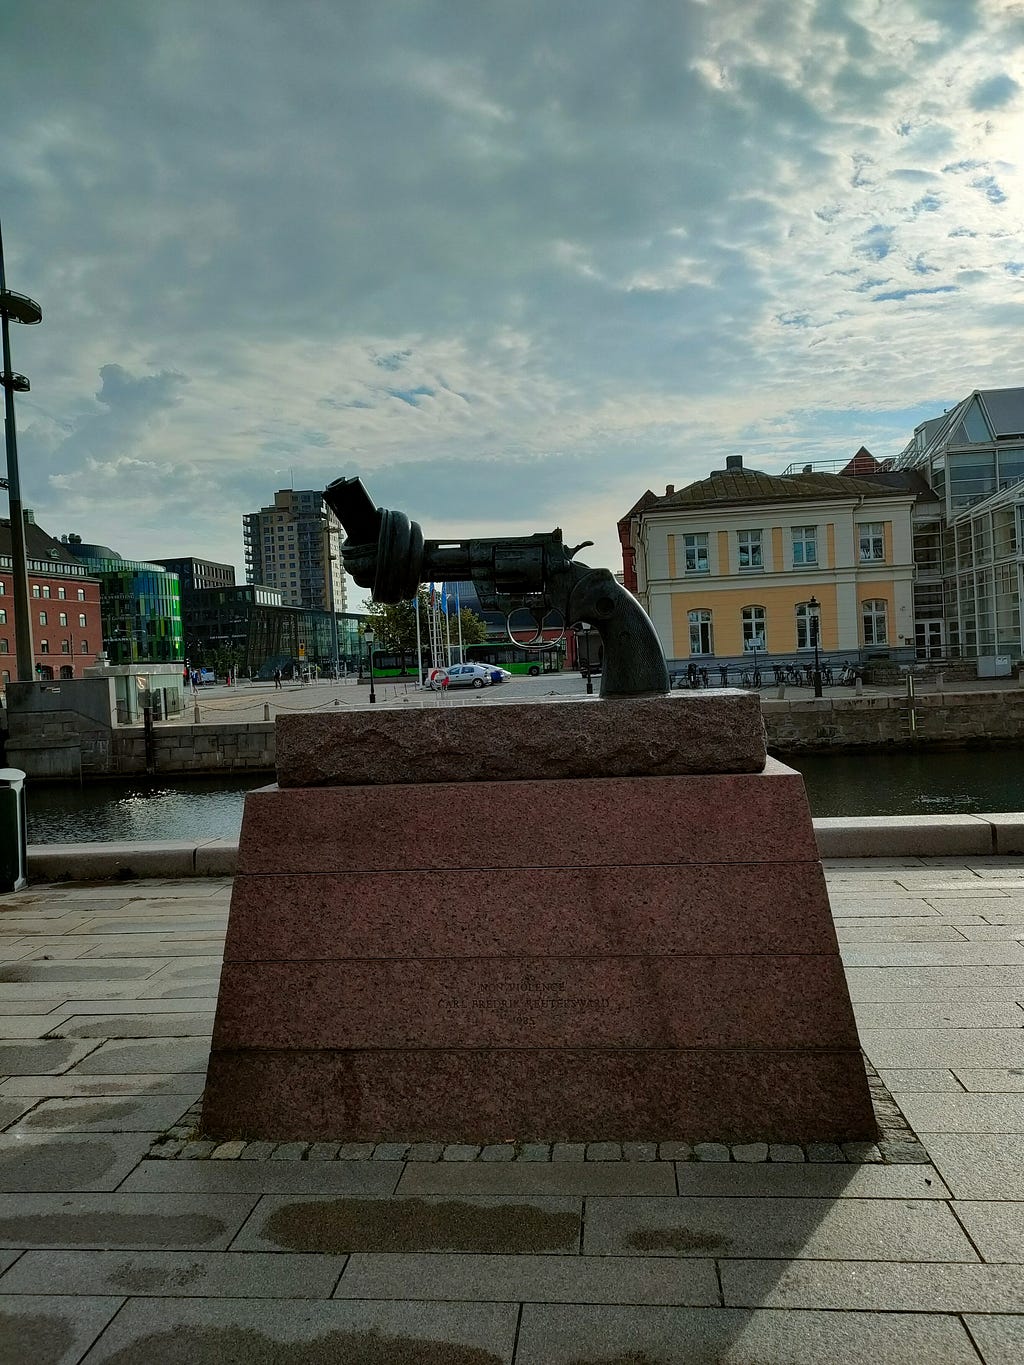 Photograph of the statue ‘The Knotted Gun’ in Malmö